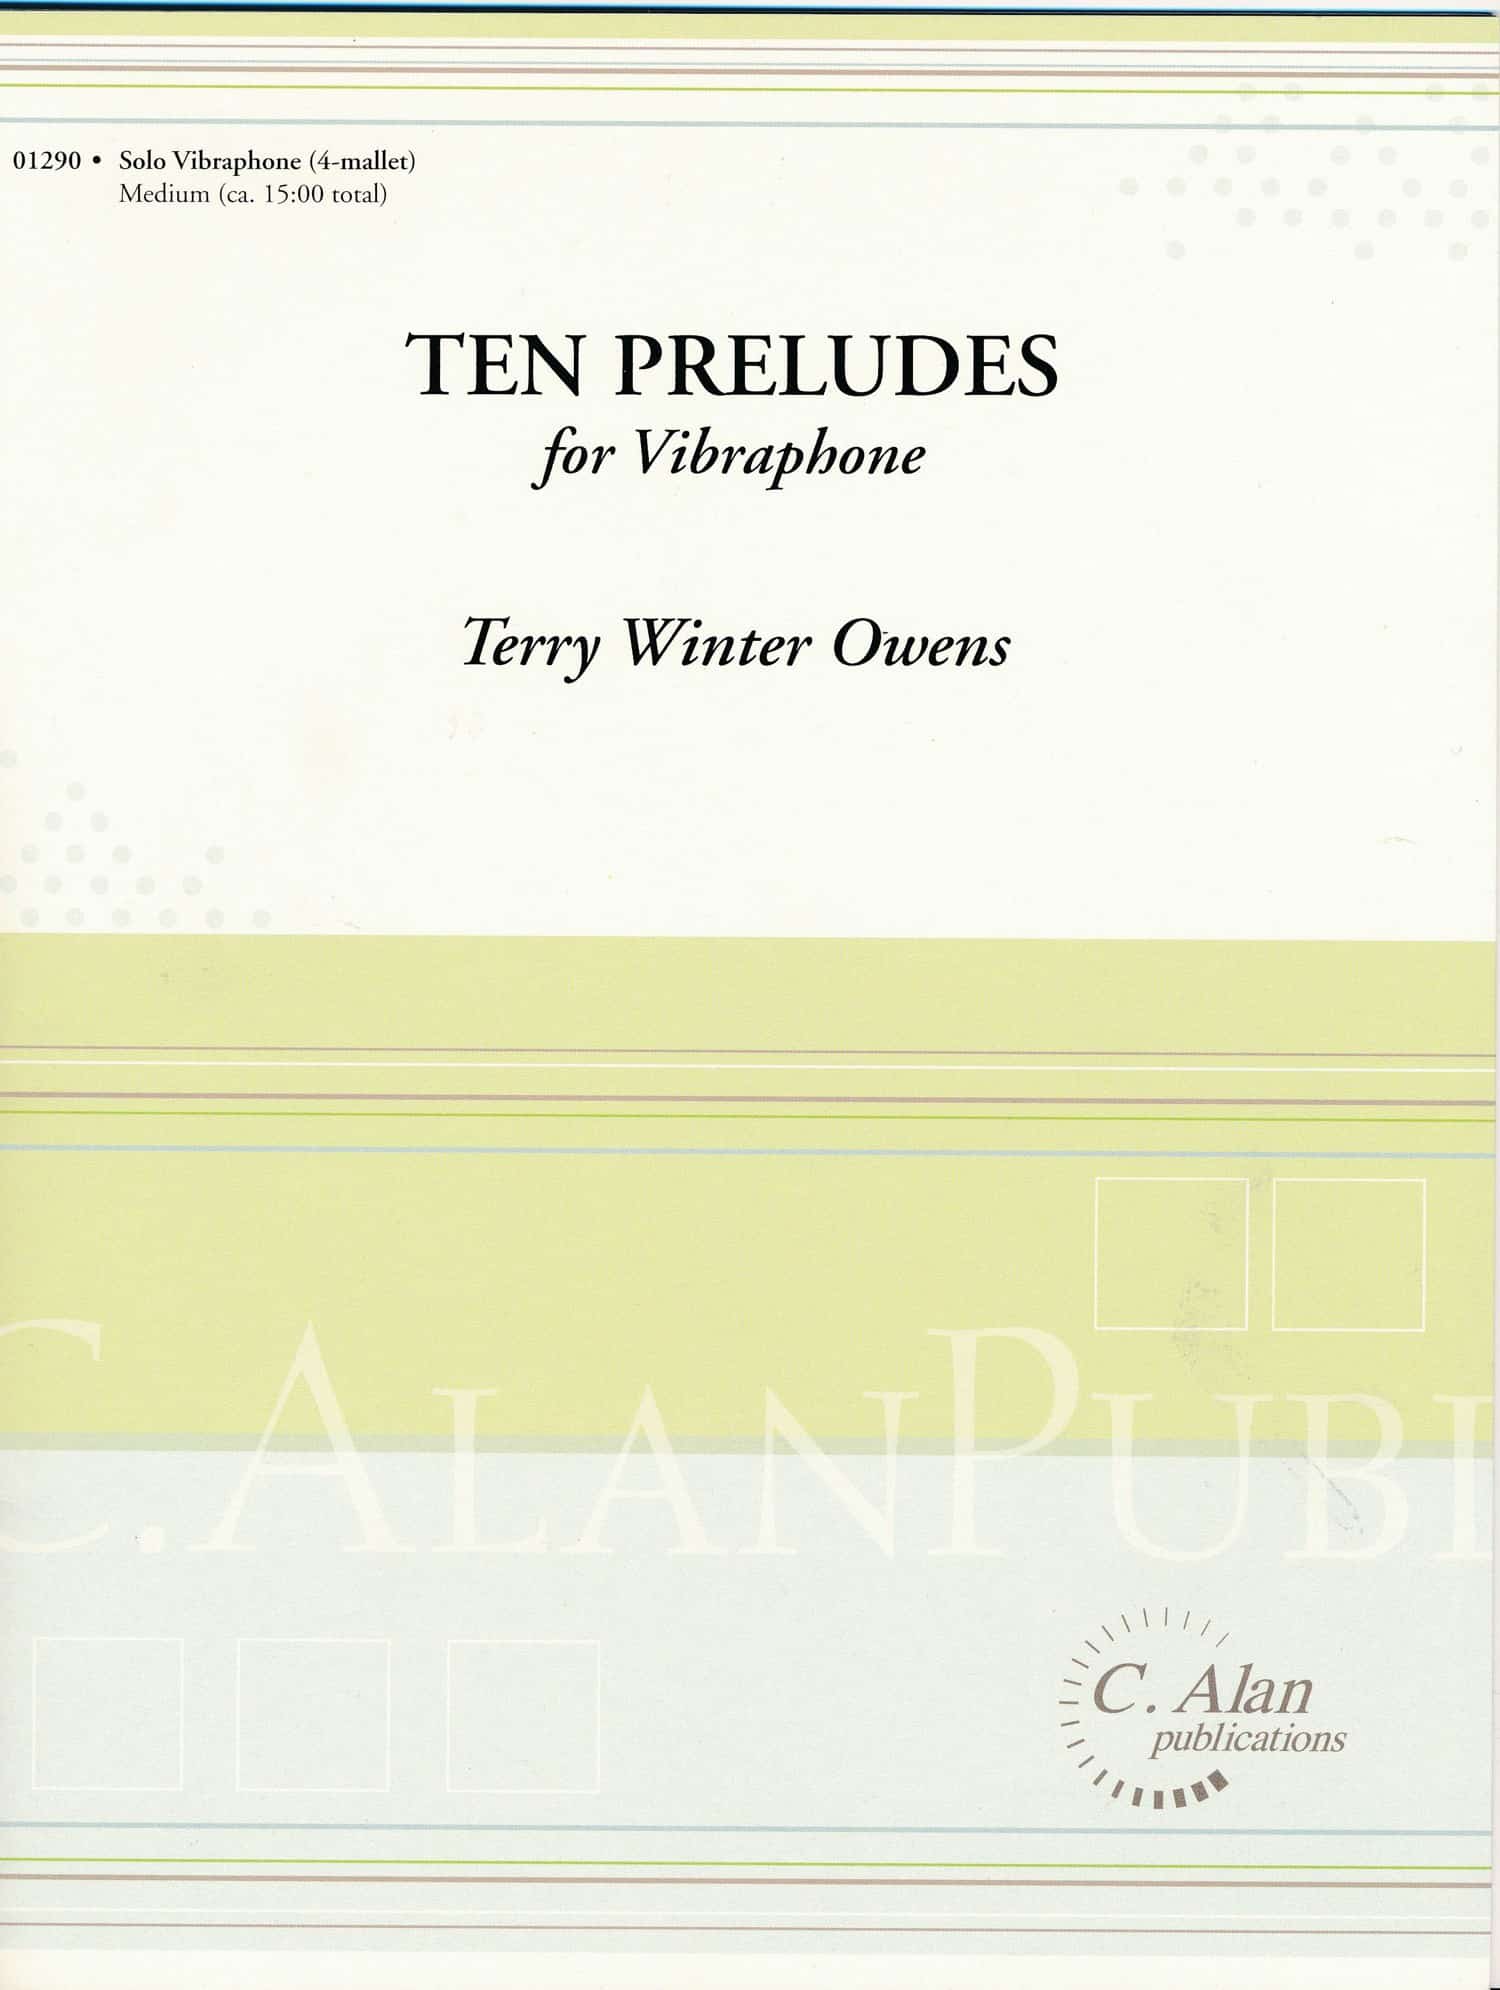 Ten Preludes for Vibraphone by Terry Winter Owens